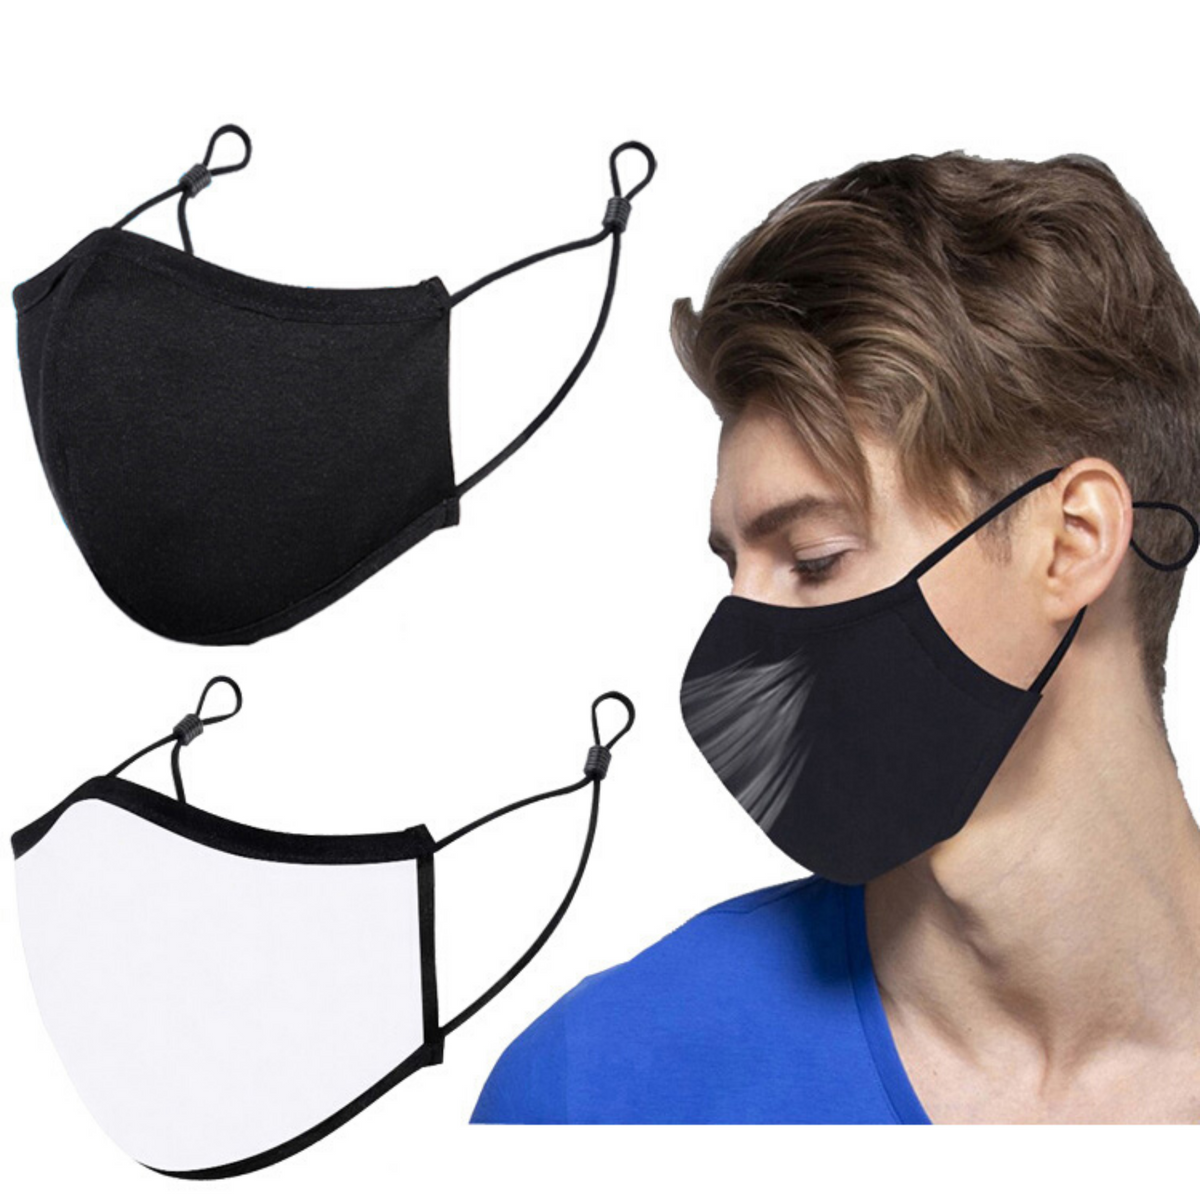 DuPont Antimicrobial 3-layer Cloth Mask with Adjustable Earloops